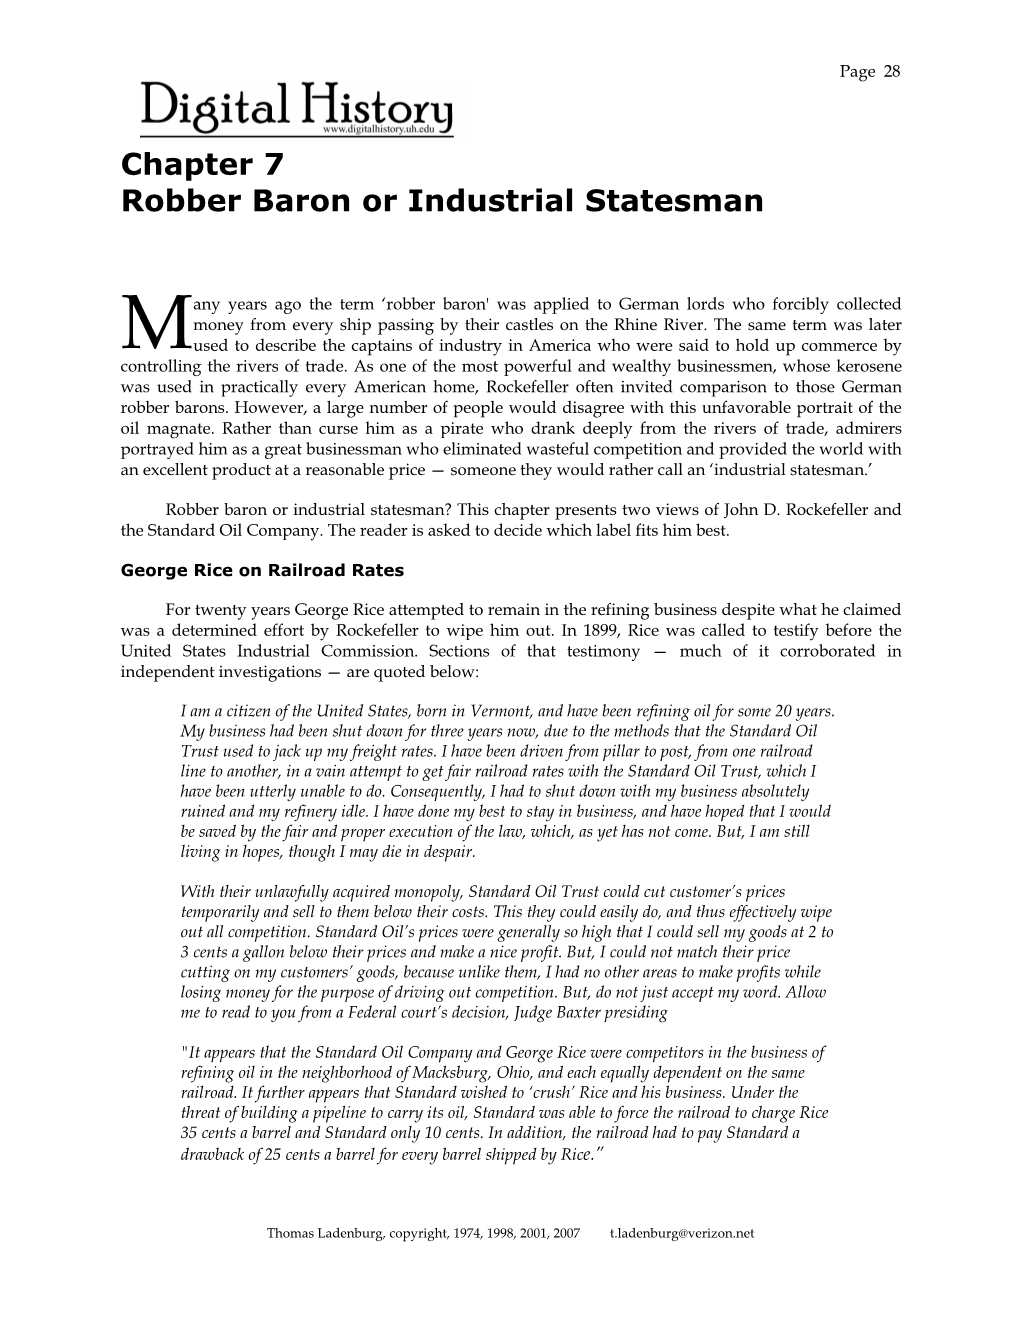 Chapter 7 Robber Baron Or Industrial Statesman